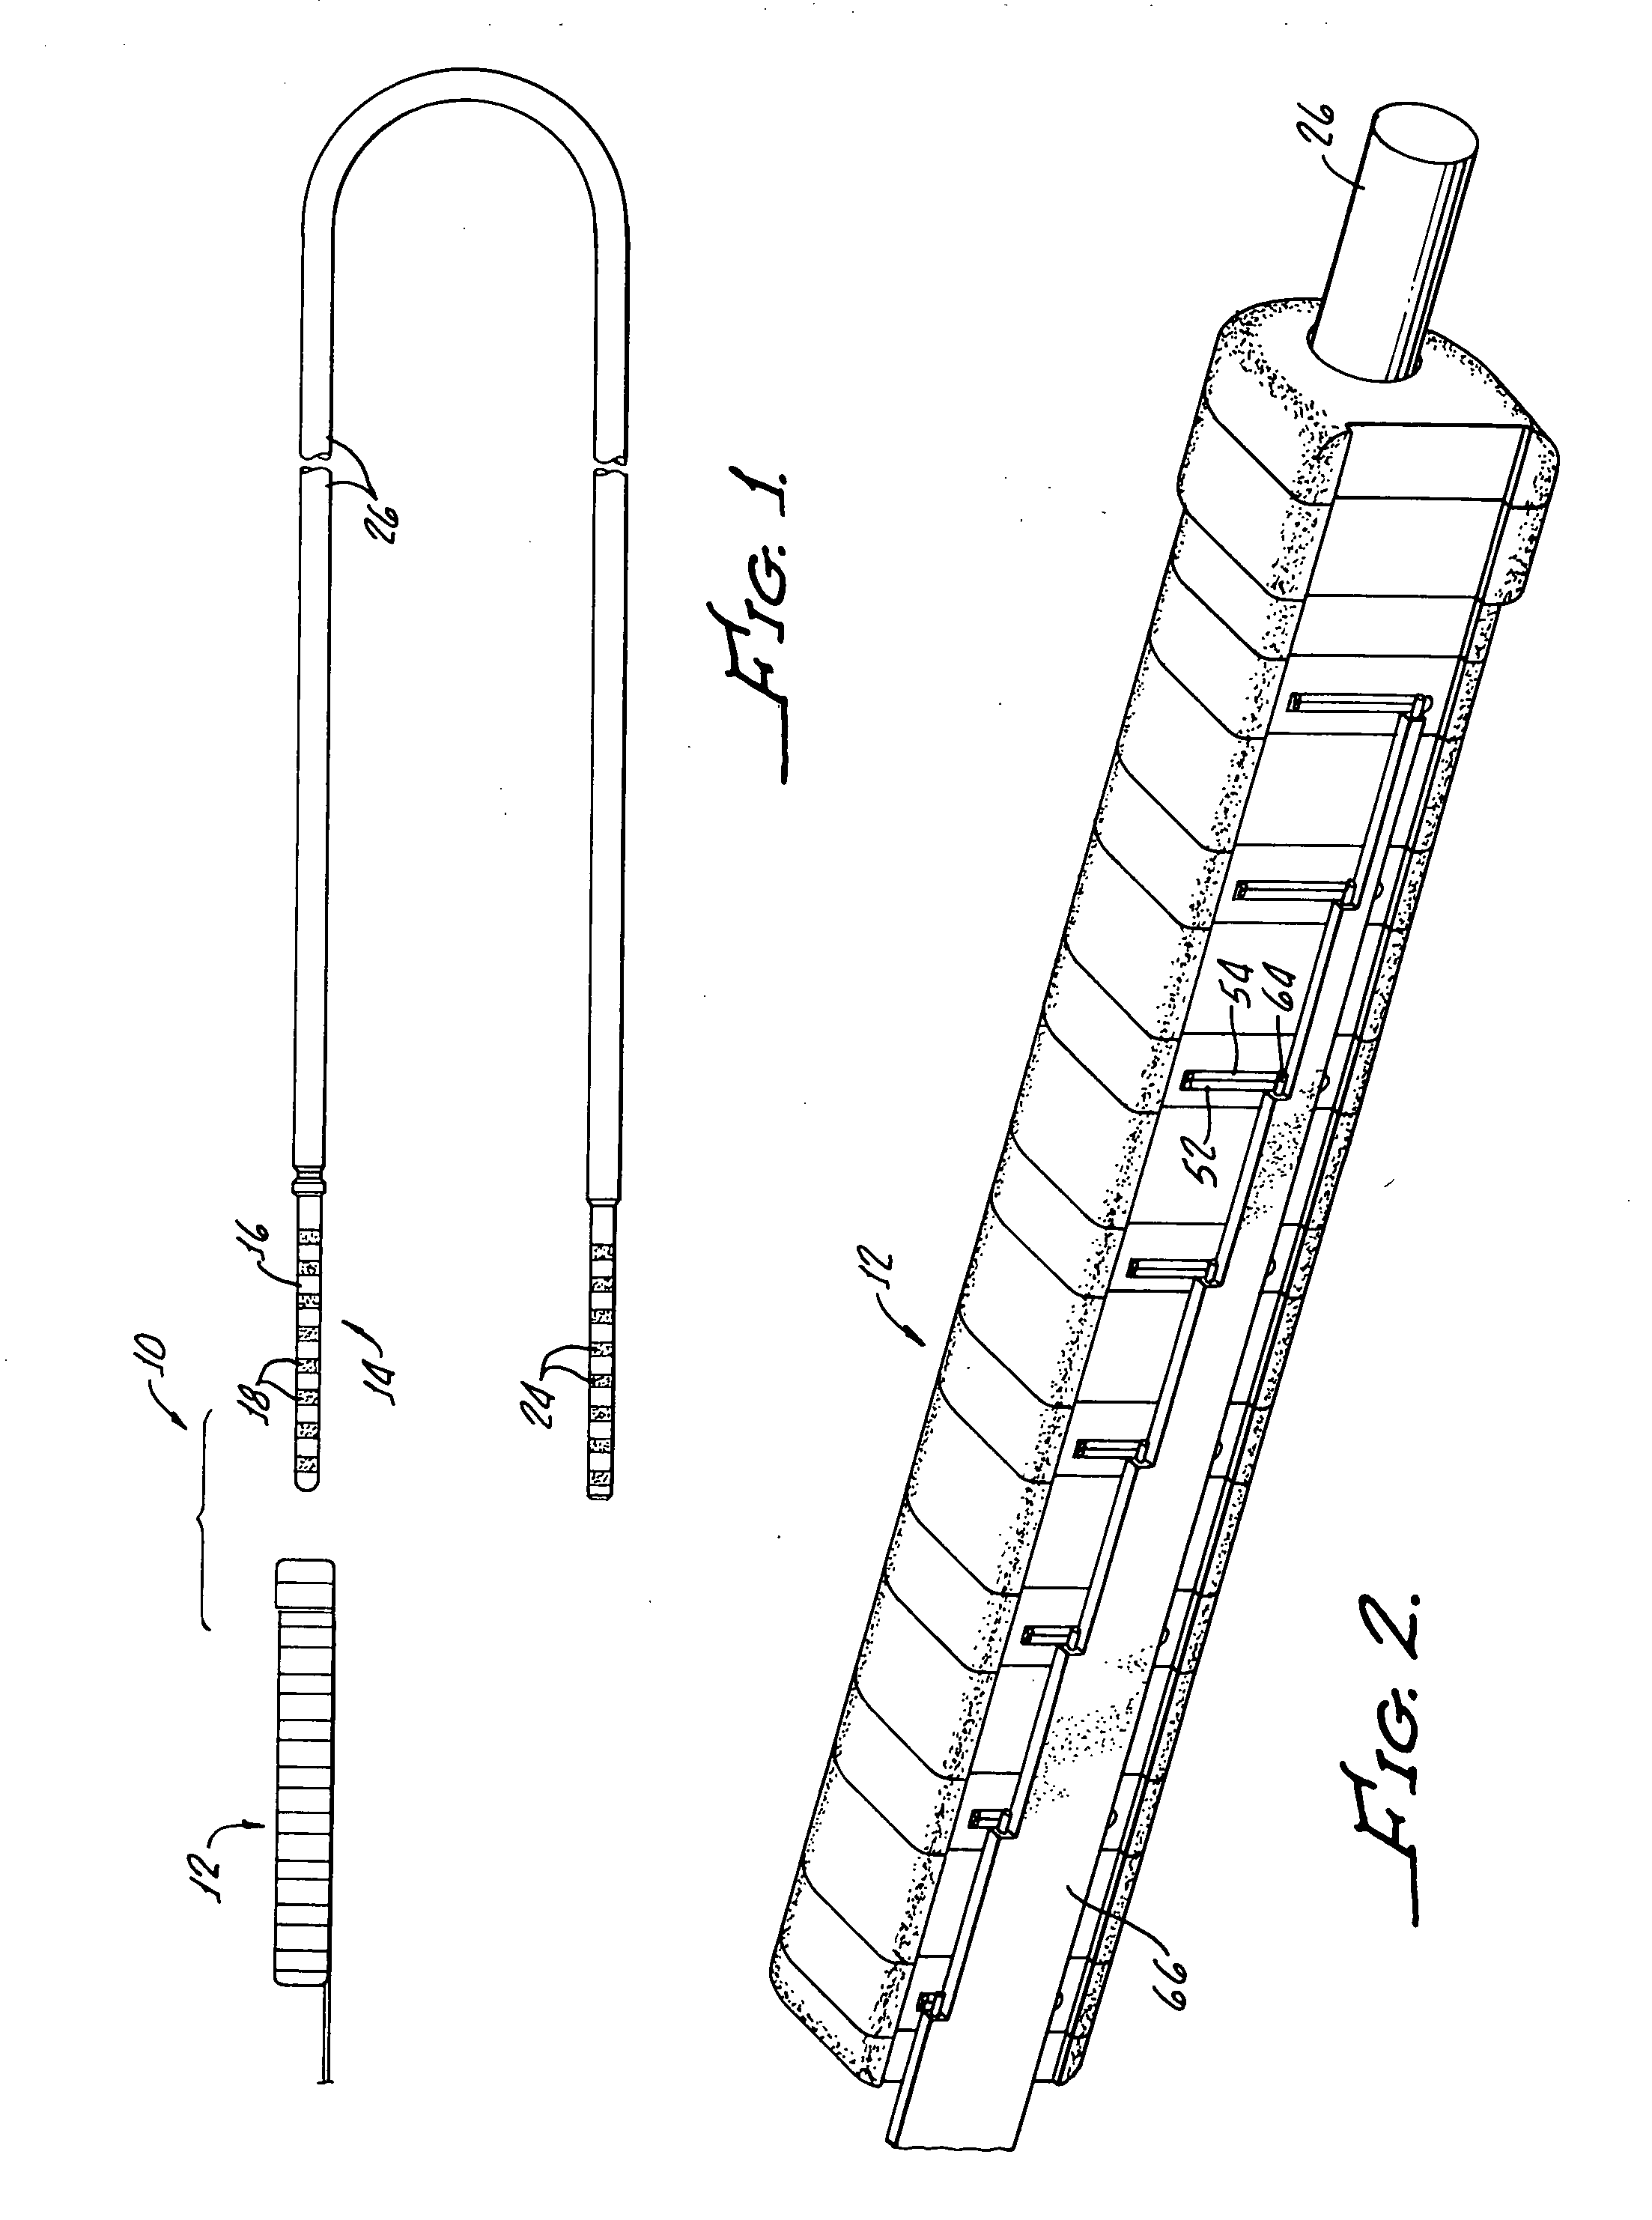 Stackable assembly for direct connection between a pulse generator and a human body